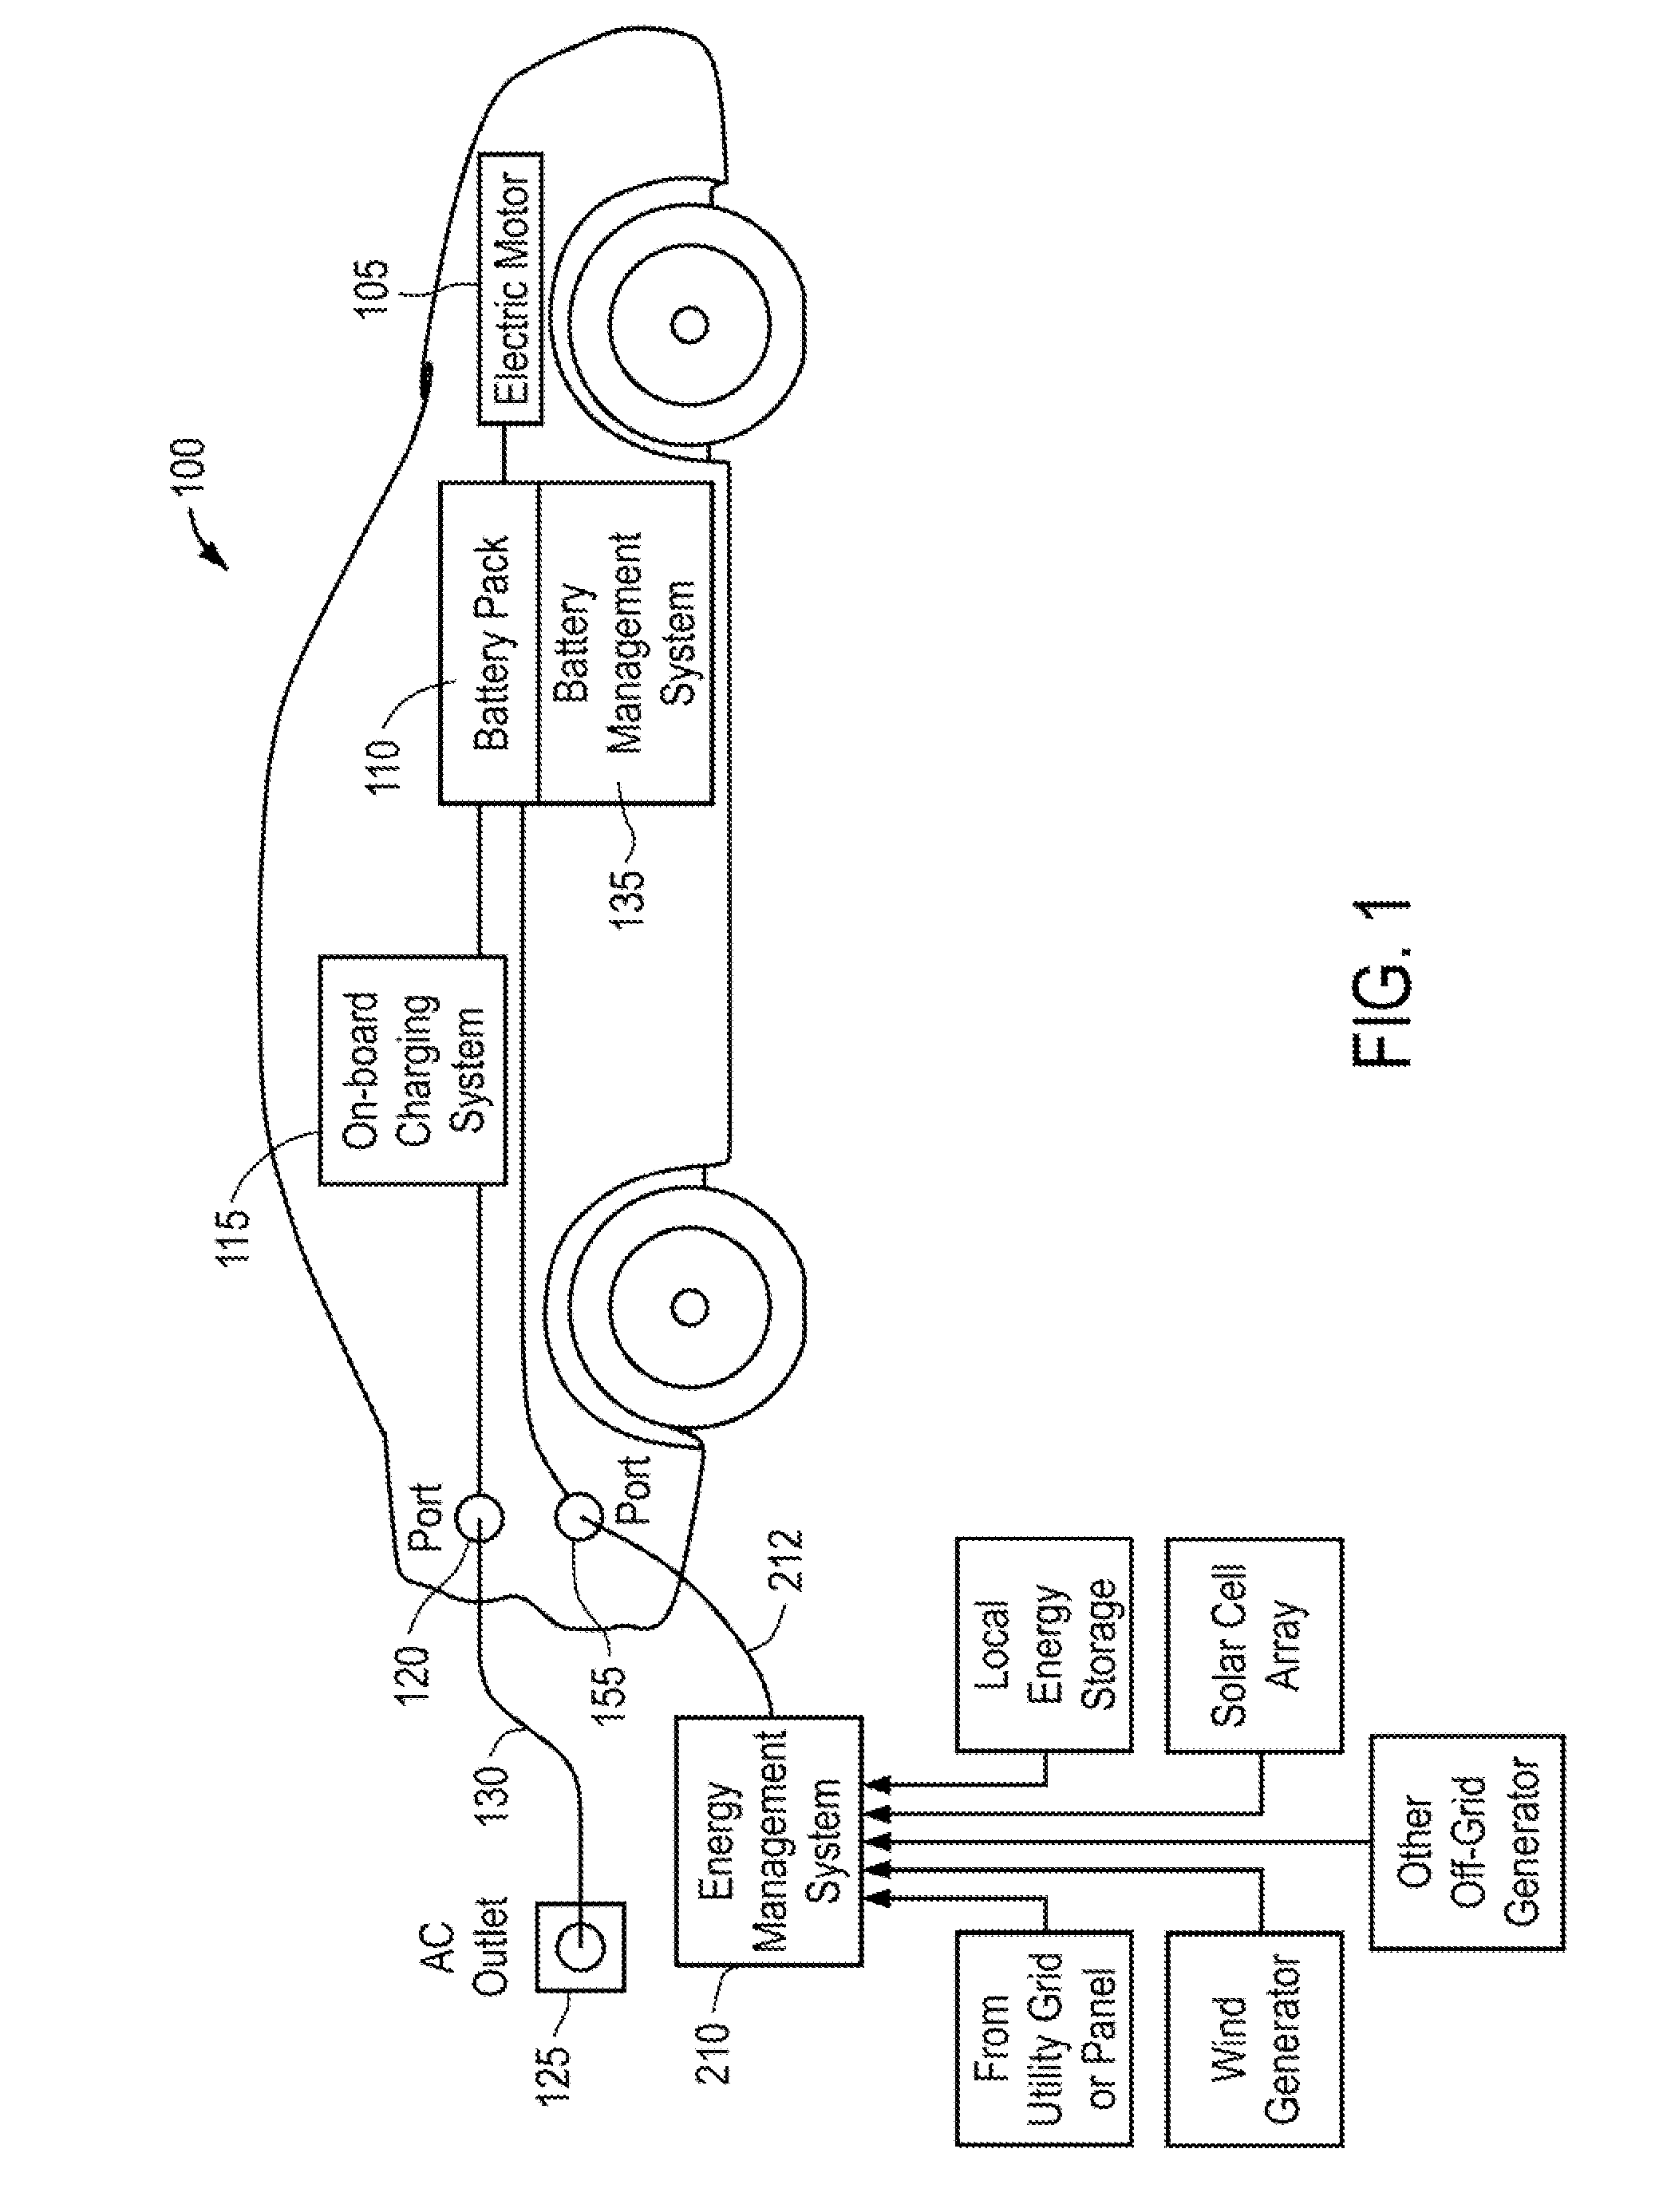 Multi-use energy management and conversion system including electric vehicle charging